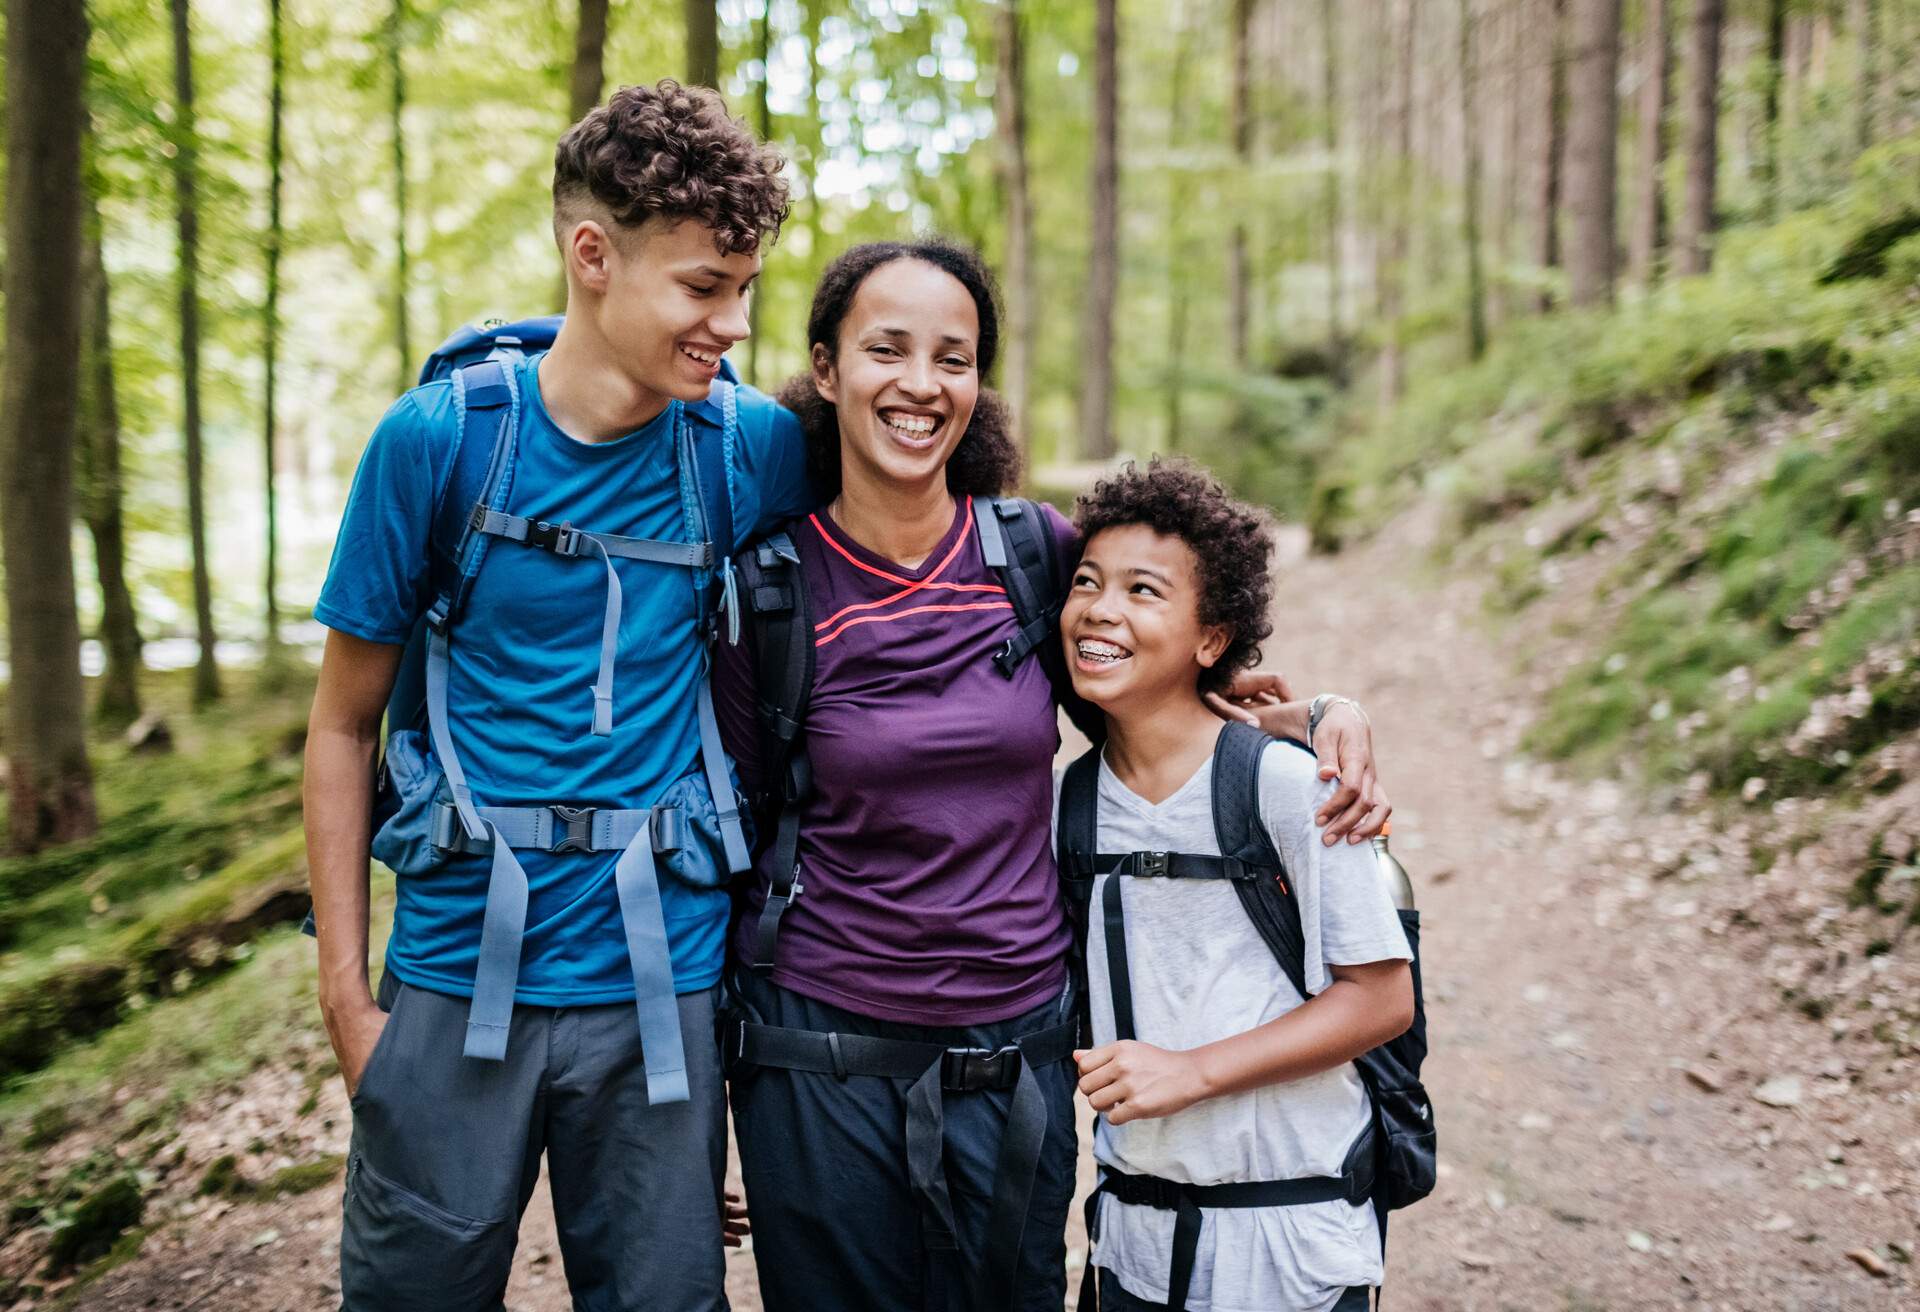 GERMANY_THEME_PEOPLE_WOMAN_KIDS_BOYS_FOREST_WOODS_HIKE_HIKERS